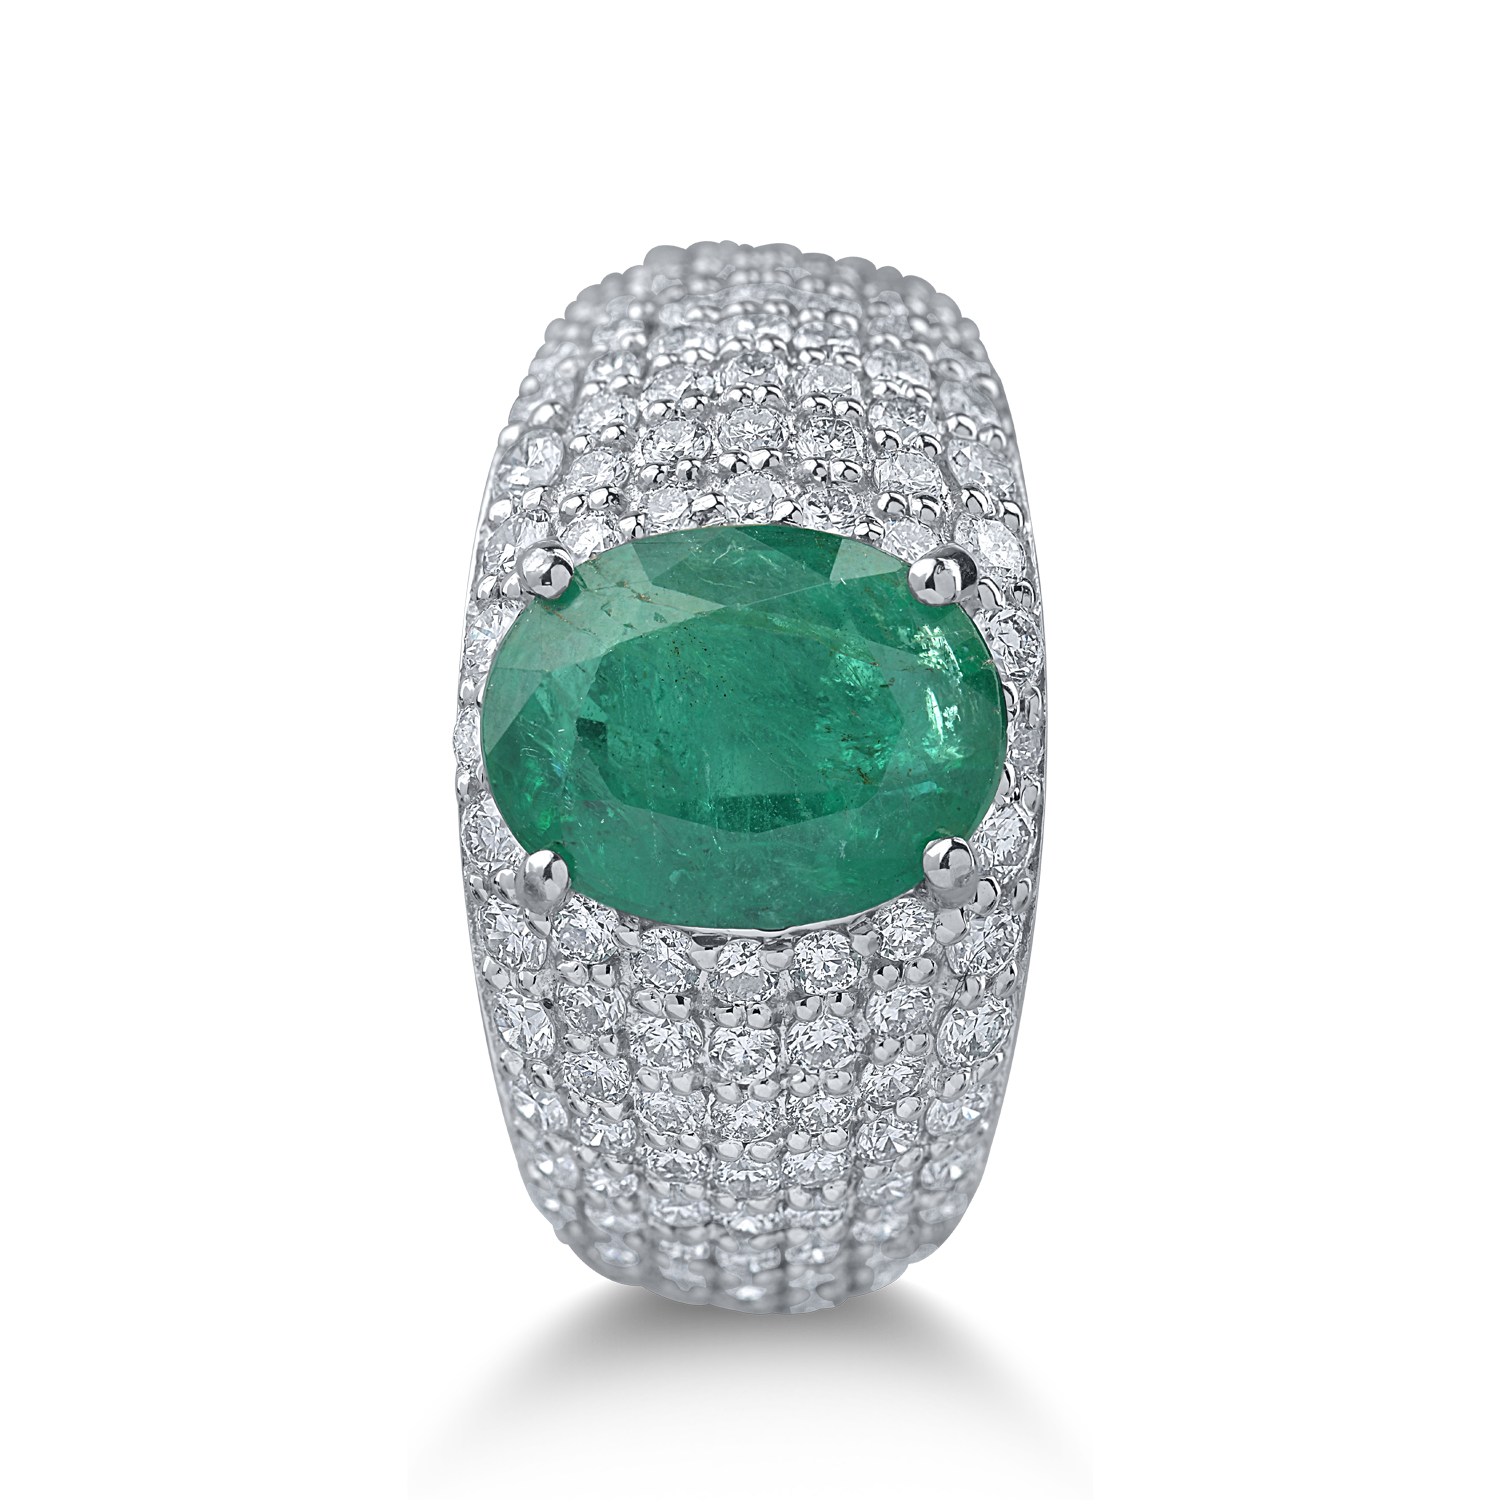 White gold ring with 2.76ct emerald and 1.444ct diamonds